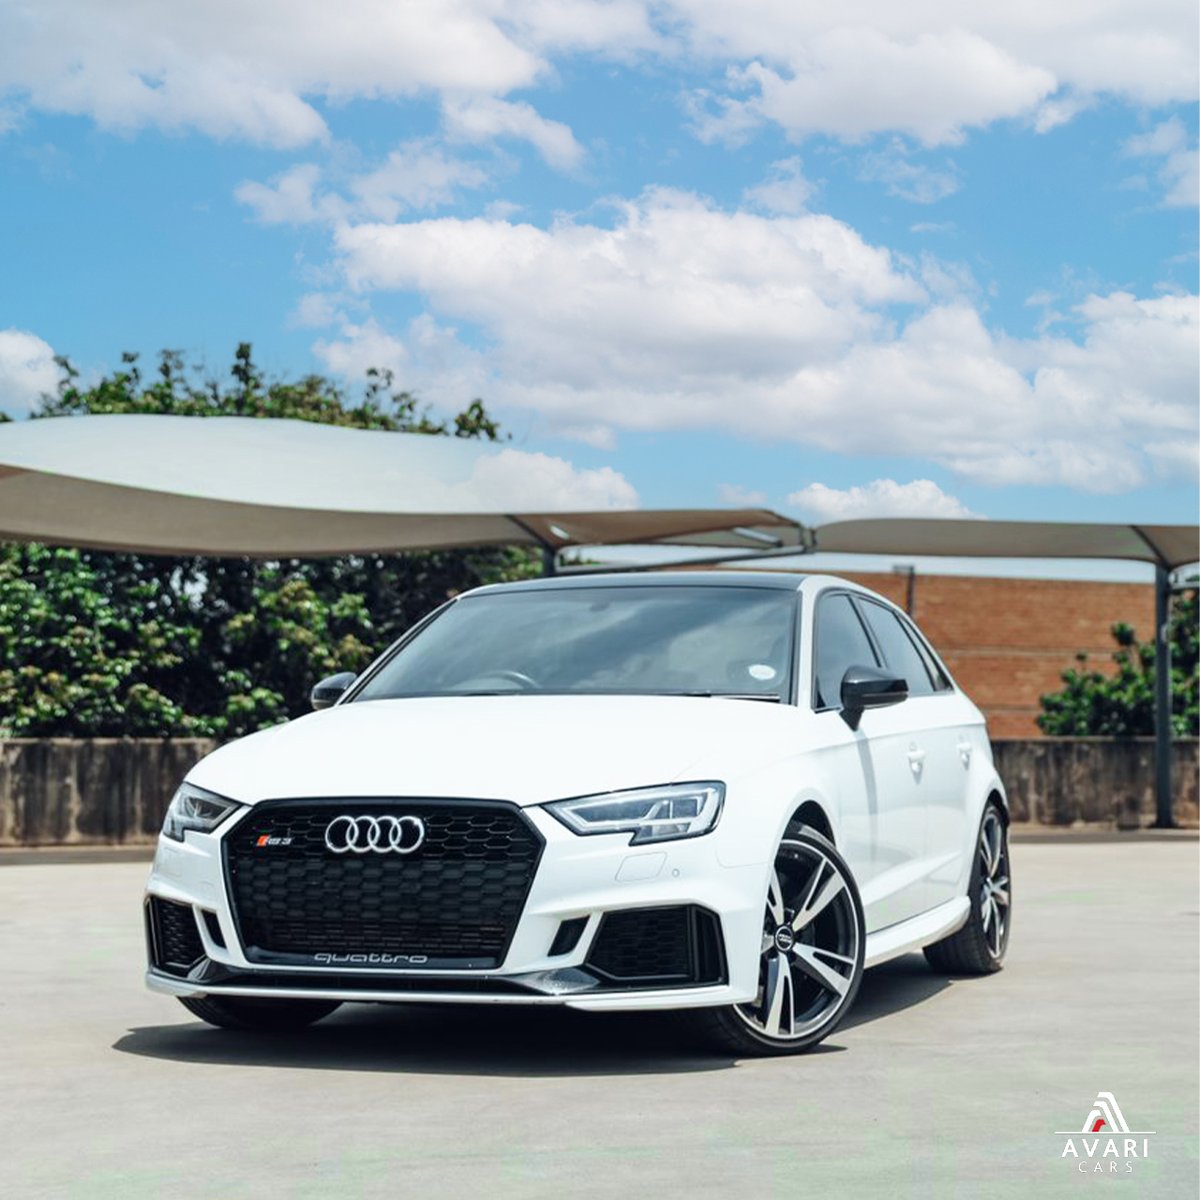 Stunt like a king with our Audi RS3.😎

avaricars.co.za
#avaricars #fyp #thebigday #carclubsa
#carrentals #carrentalservice #rentalcars